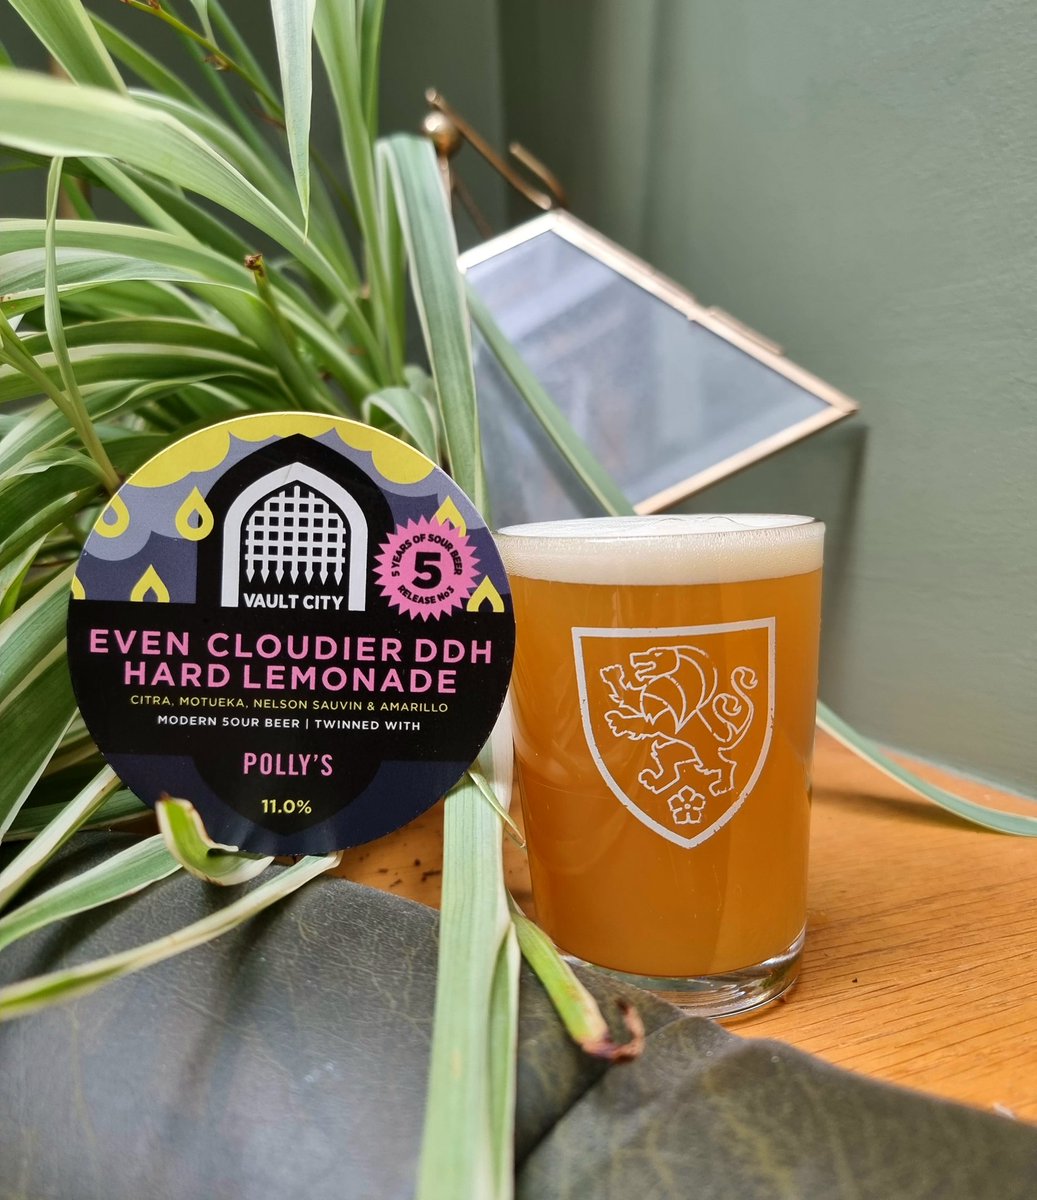 New load of brews dropped off, and one so enticing we couldn't wait to stick it straight on. Lots of lovelies coming to a tap soon, but as of now, we've got this brand spanker pouring: Vault City & Polly's Brew - Even Cloudier; 11.0% DDH Hard Lemonade Sour